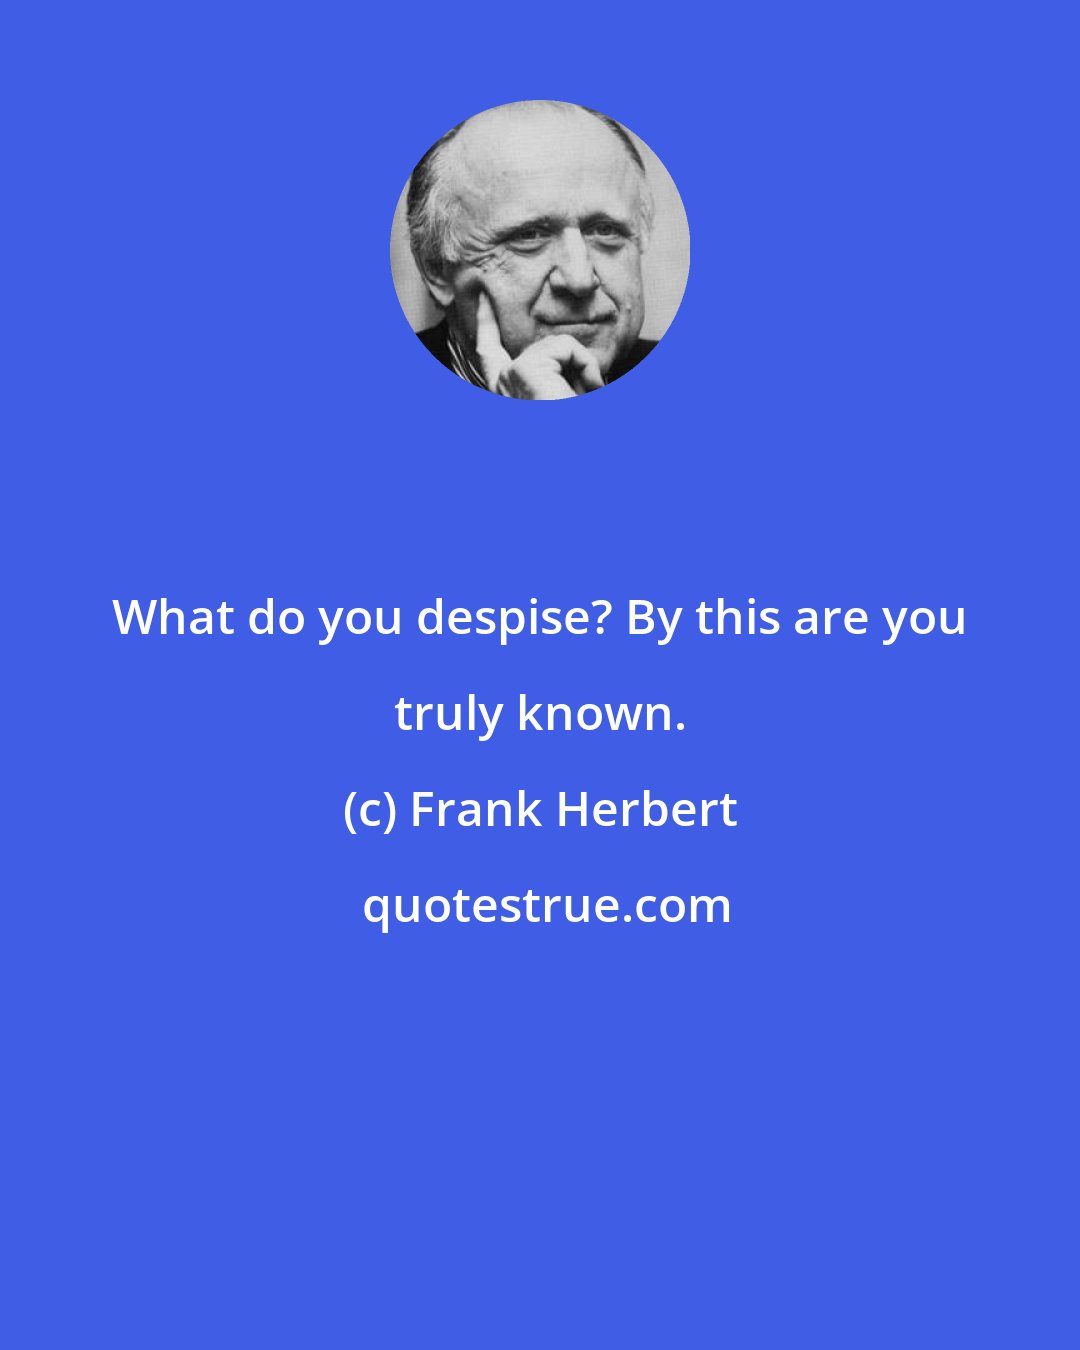 Frank Herbert: What do you despise? By this are you truly known.